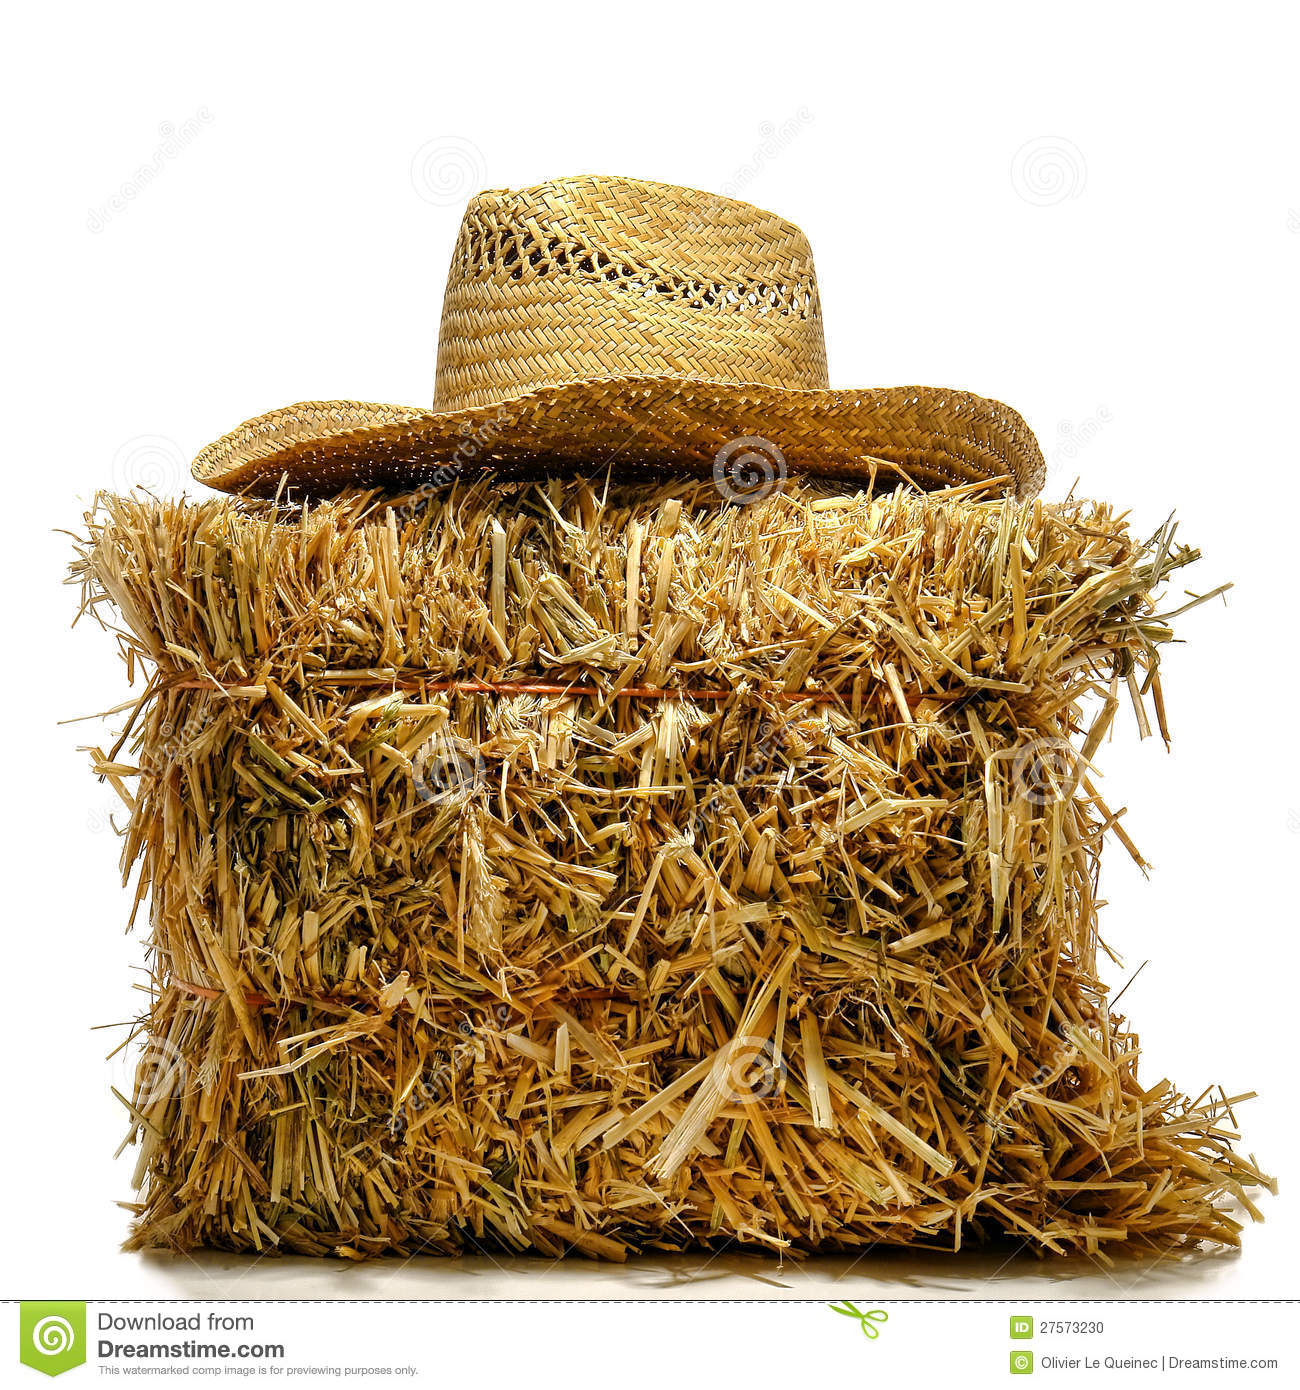 Cowboy Farmer Straw Hat On Hay Bale Over White Stock Photo   Image